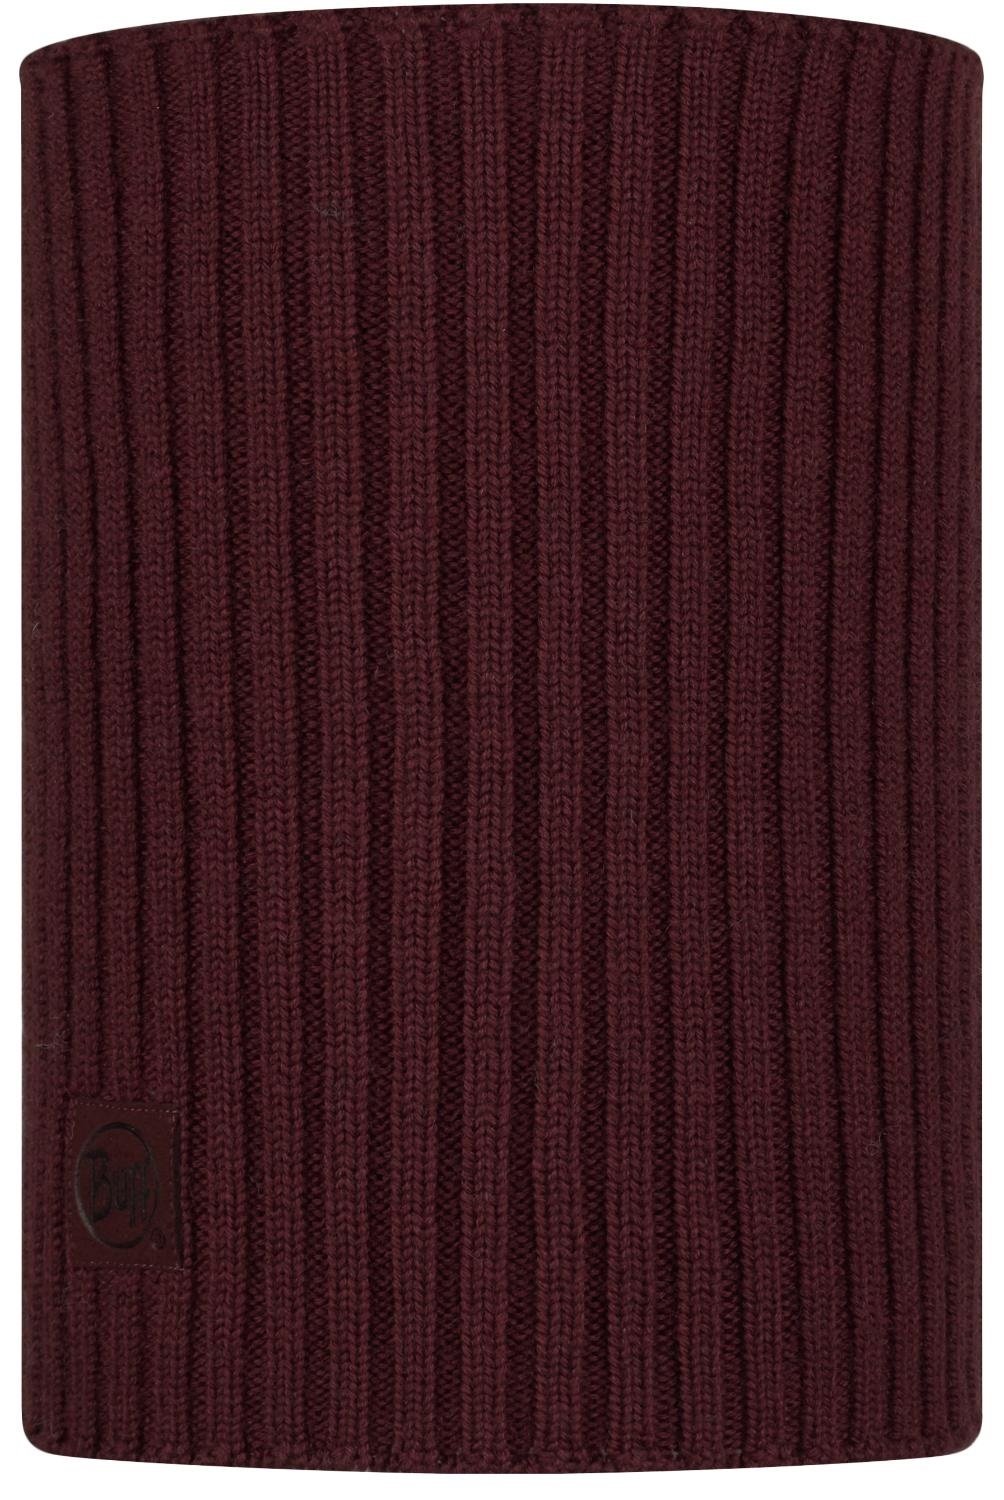 Шарф Buff Knitted Neckwarmer Comfort Norval Maroon, US:one size, 124244.632.10.00 шапка buff knitted hat norval pansy us one size 124242 601 10 00